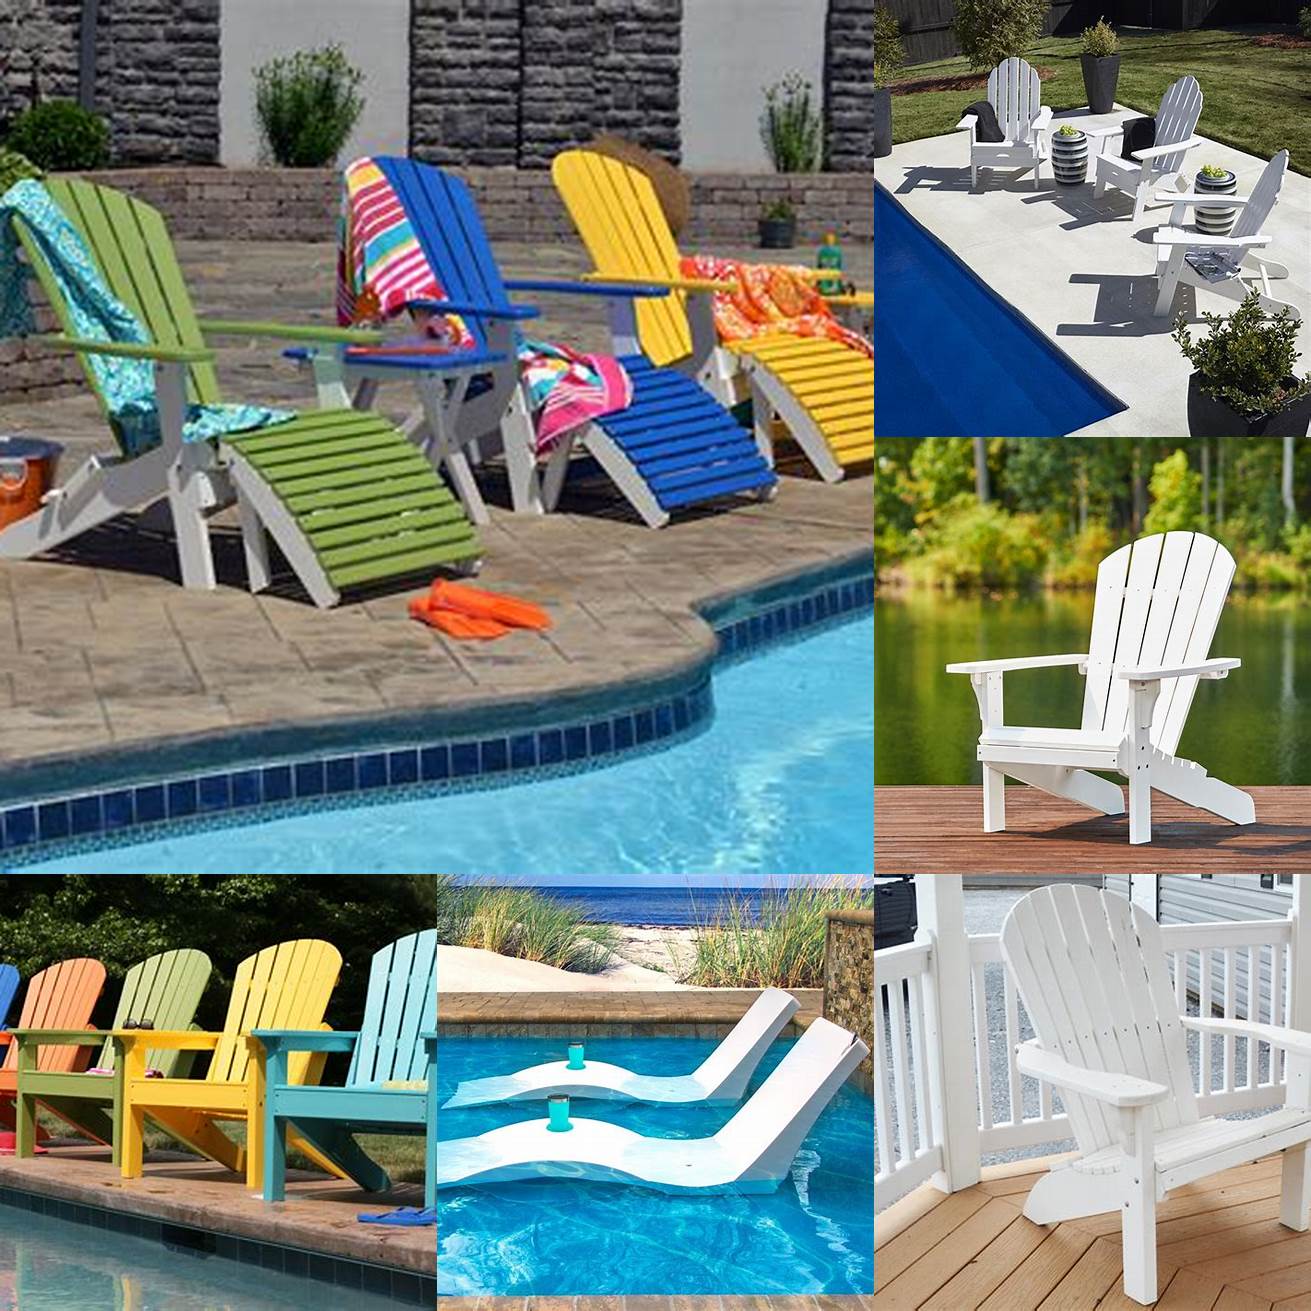 Poolside - Set up a few white Adirondack chairs around your pool for a chic resort-like feel